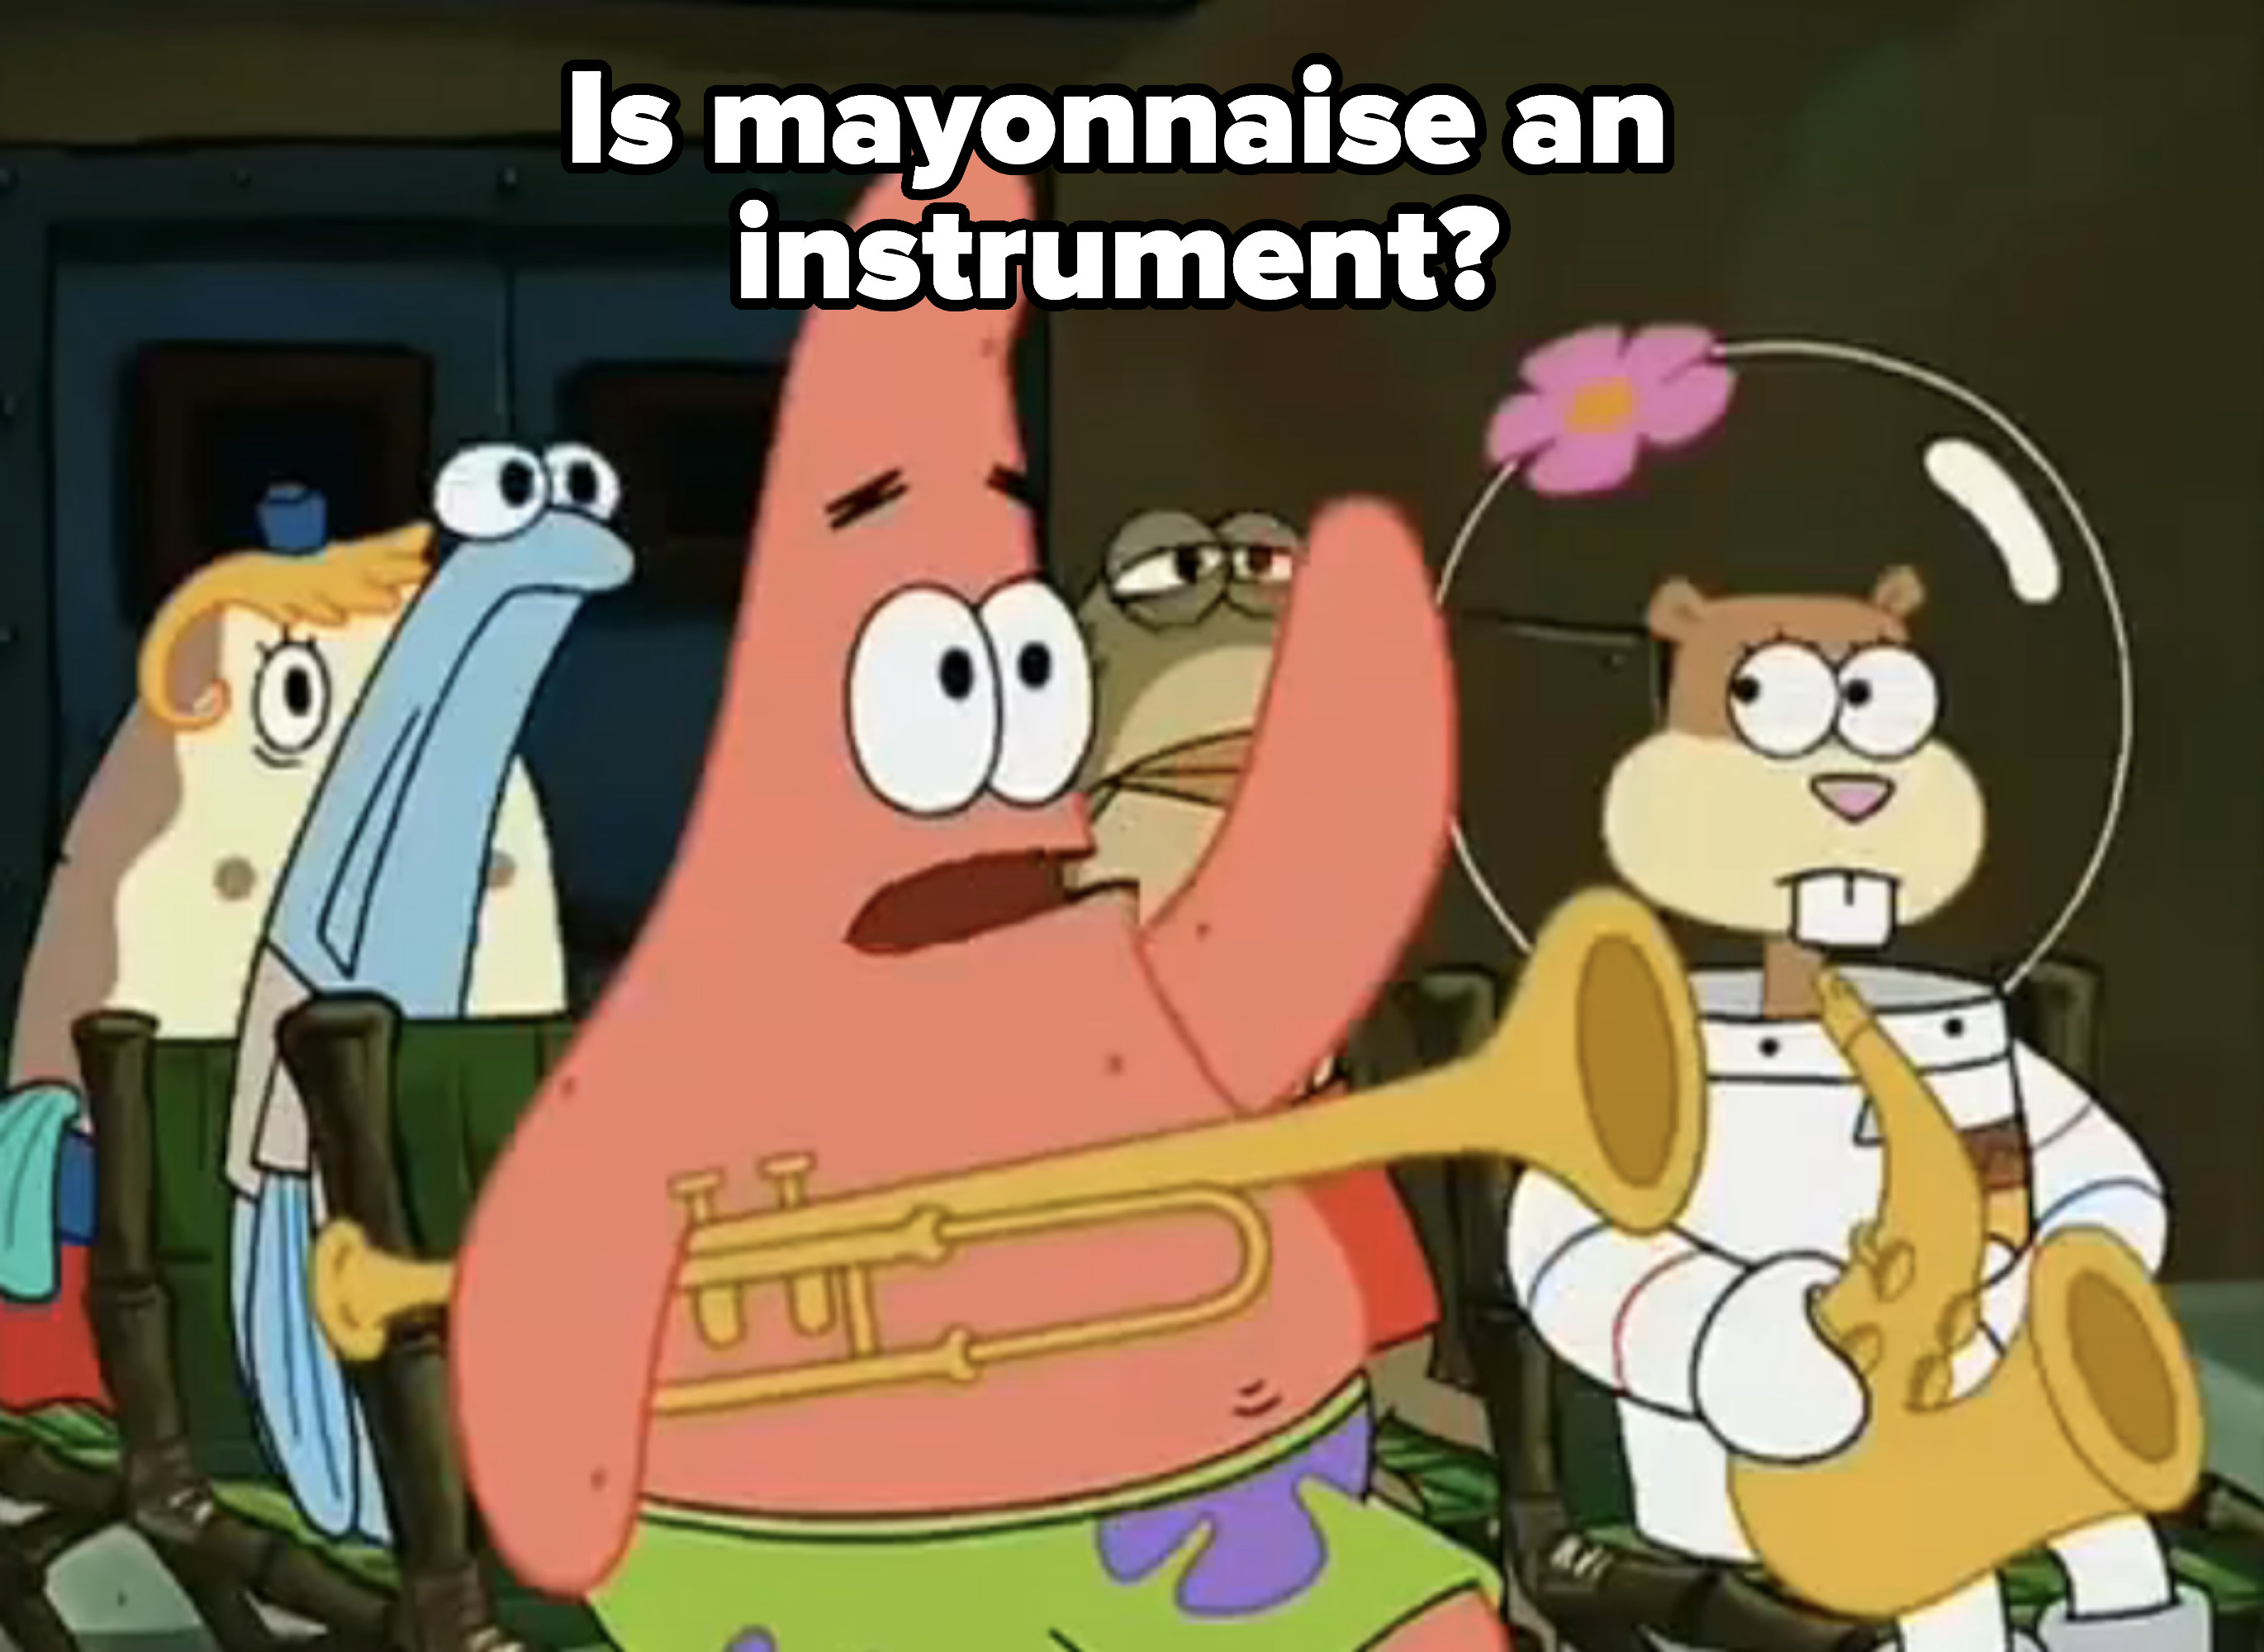 Patrick asking, &quot;Is mayonnaise an instrument?&quot;